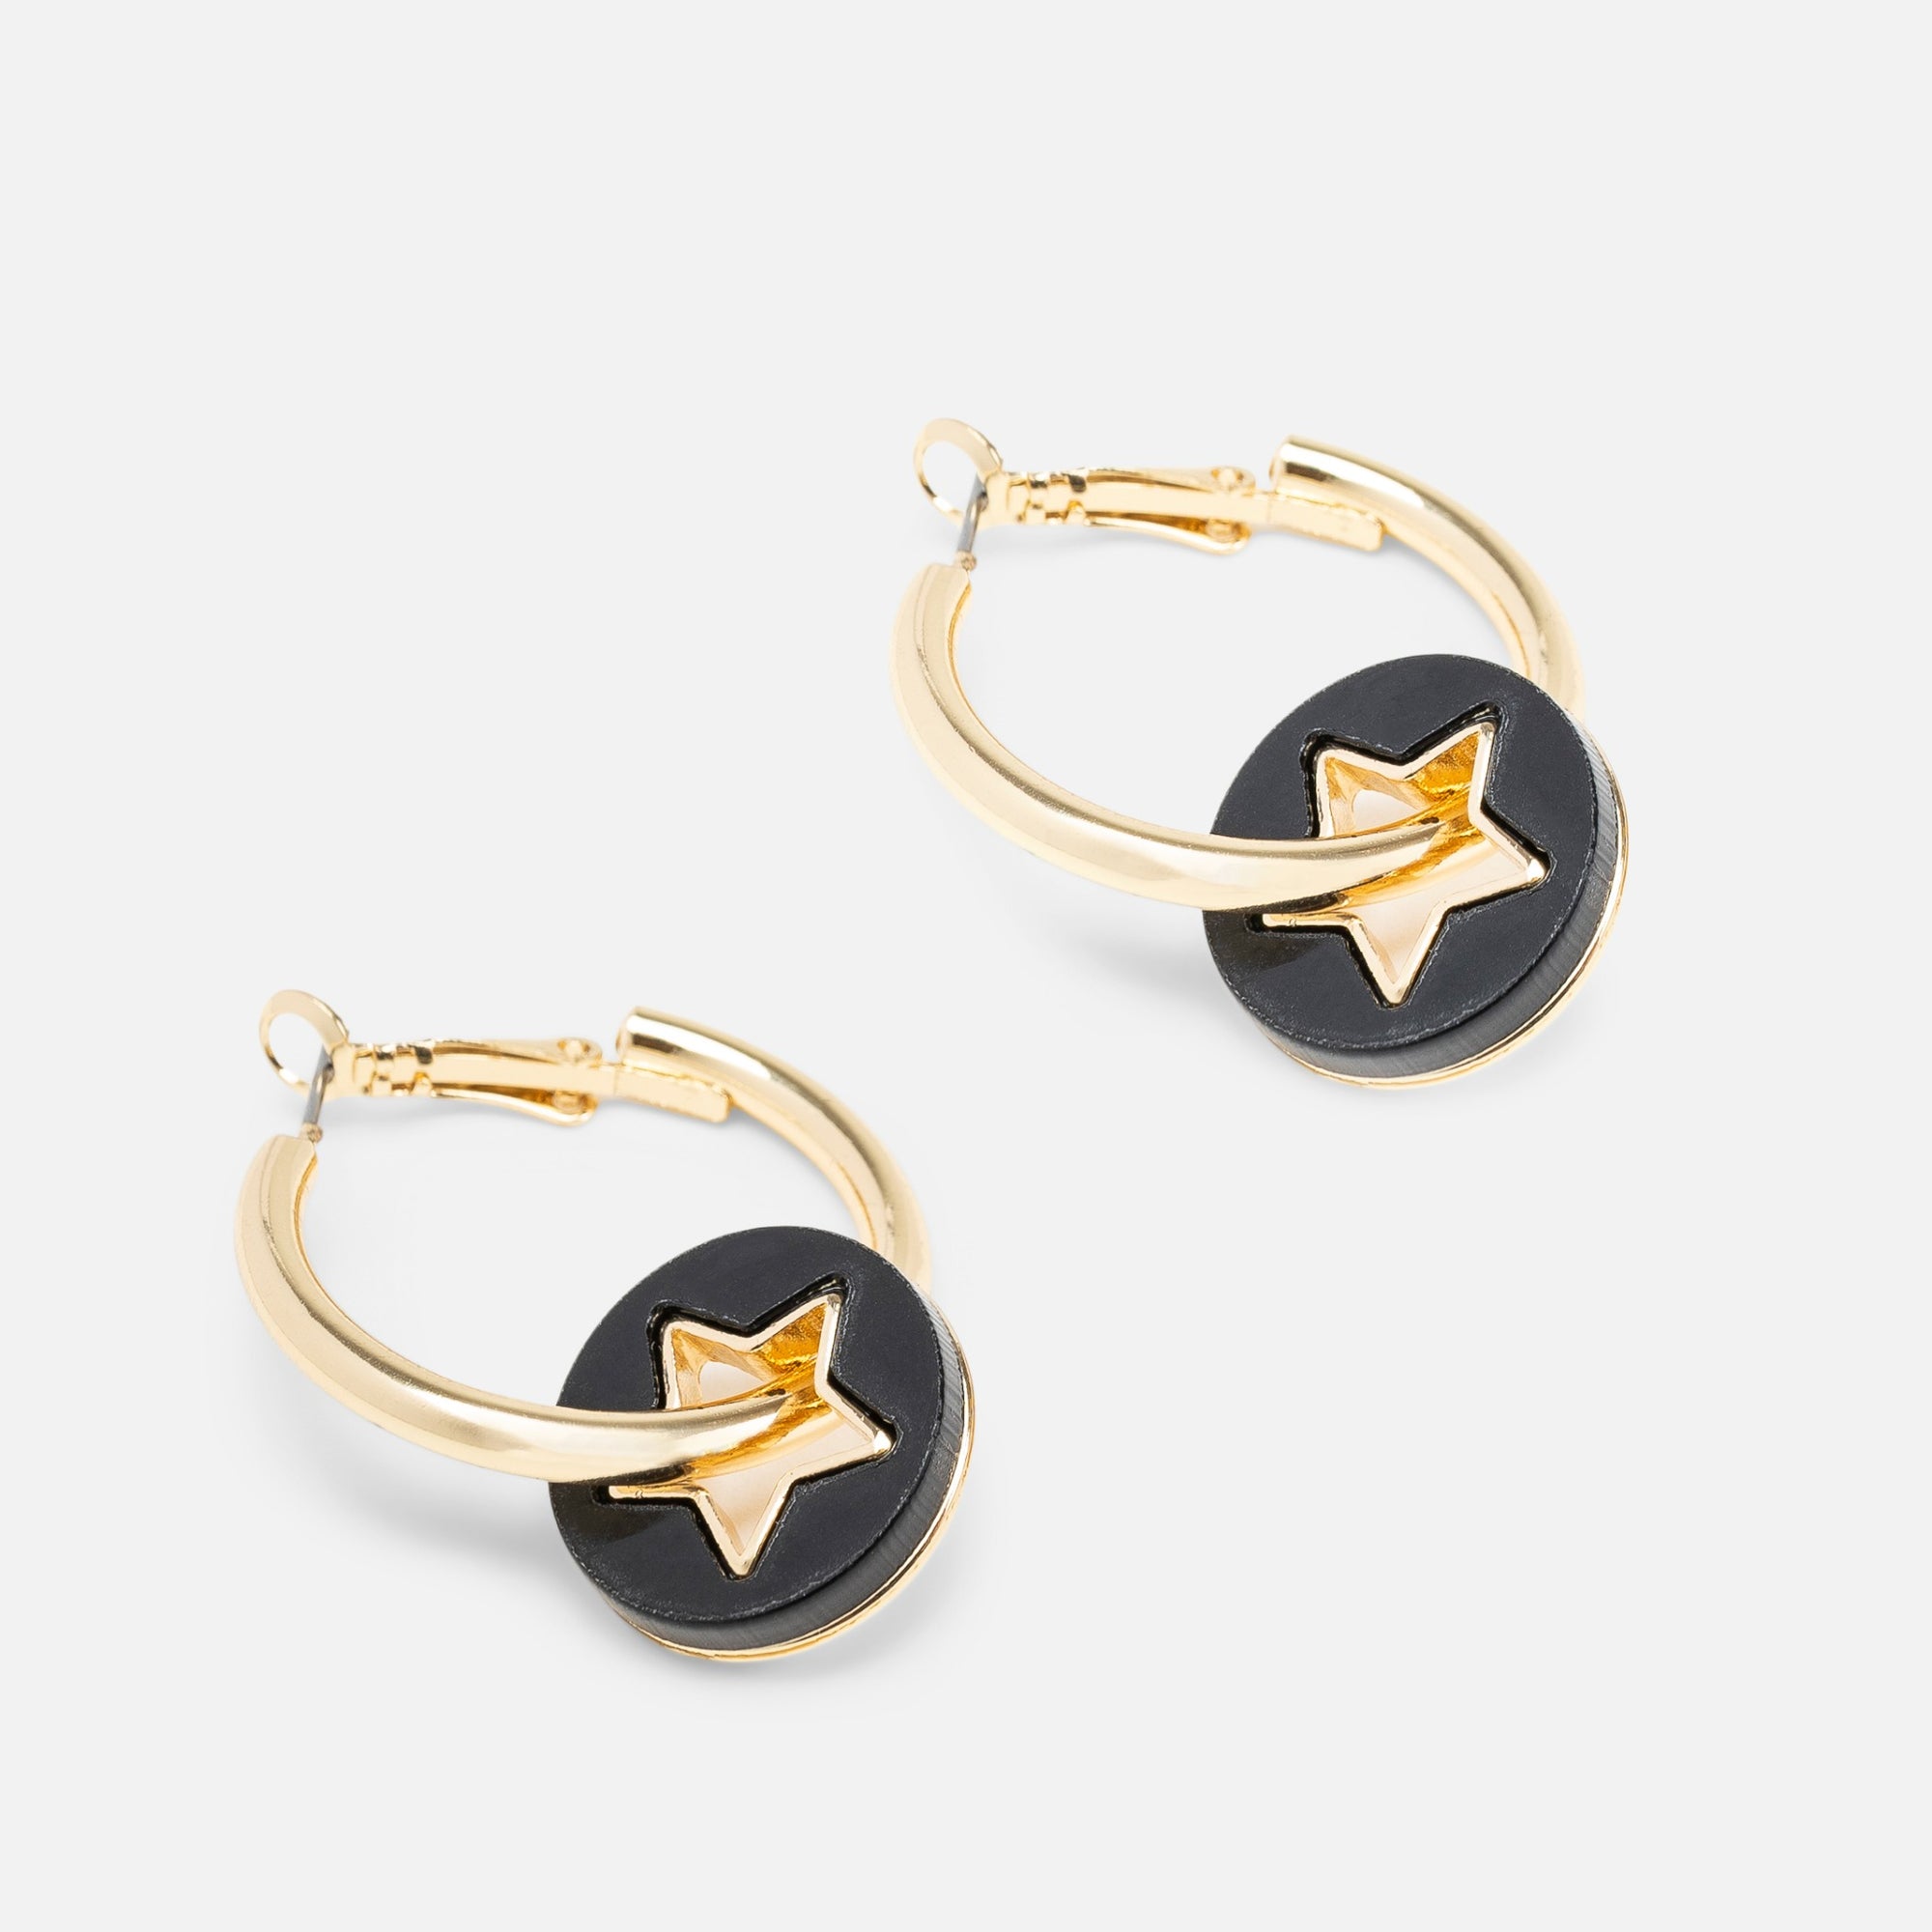 Hoop earrings with horn and star charms